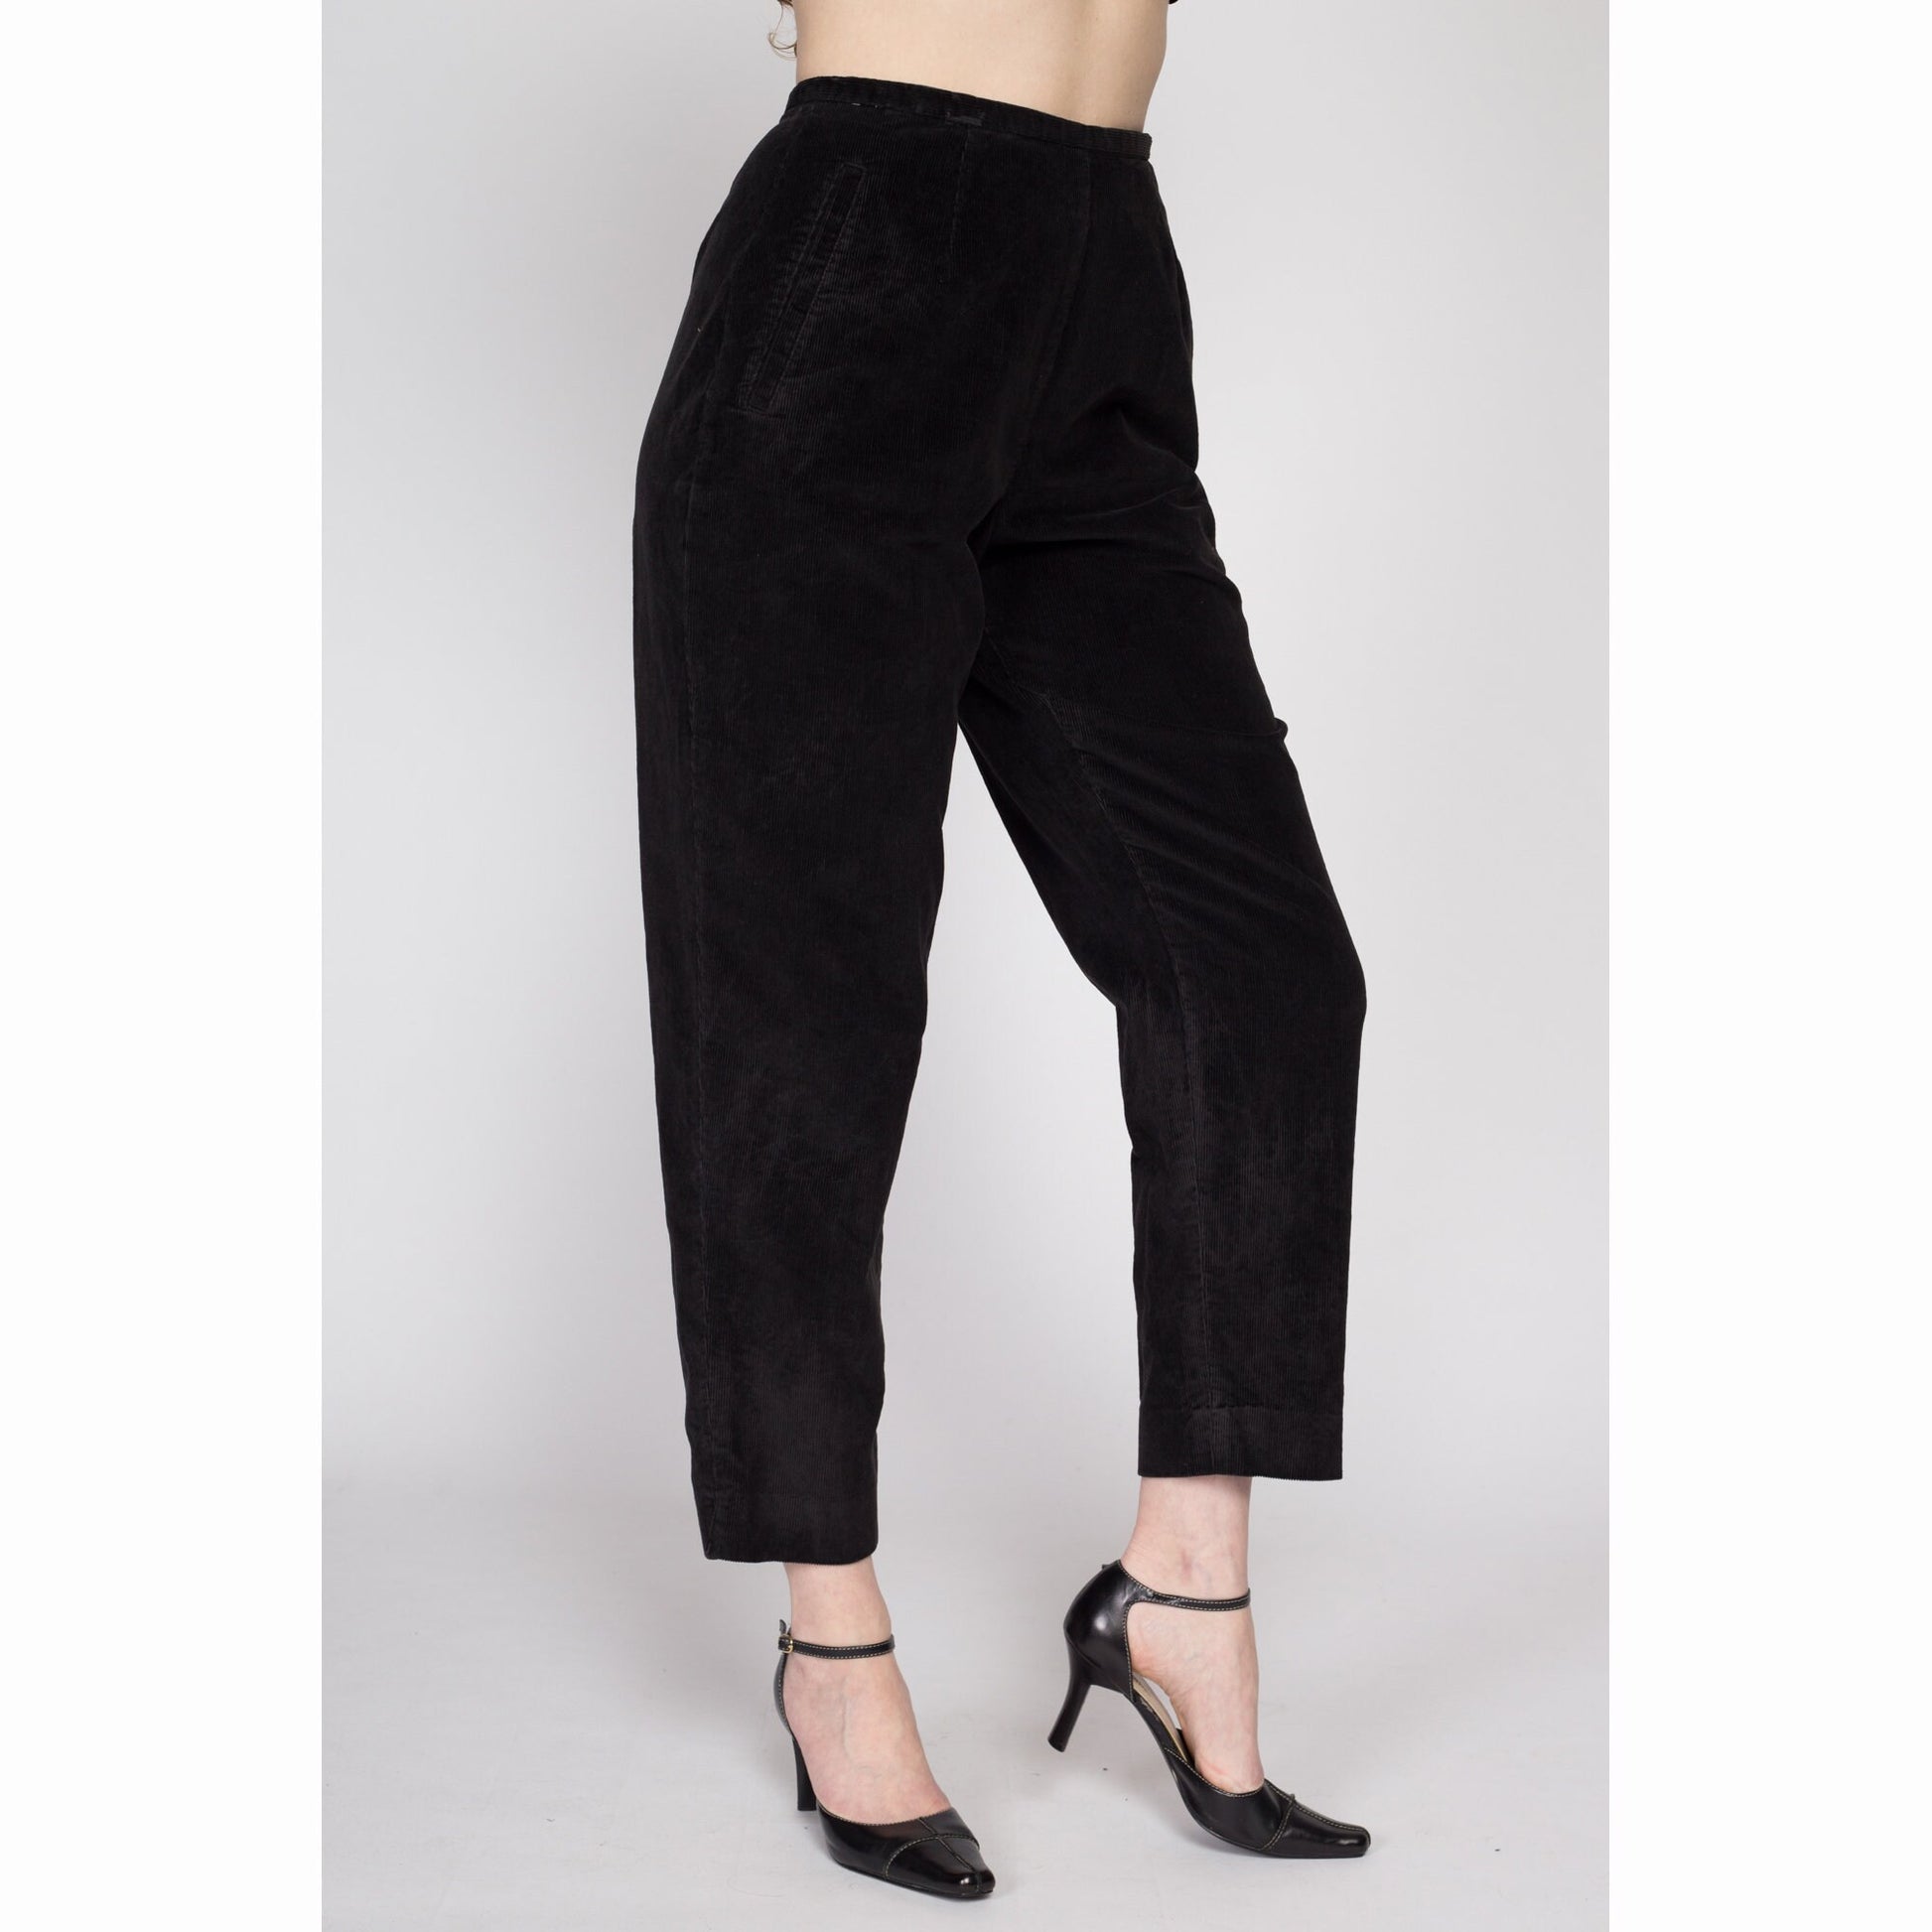 Small 80s Black Corduroy High Waisted Side Zip Pants 26 – Flying